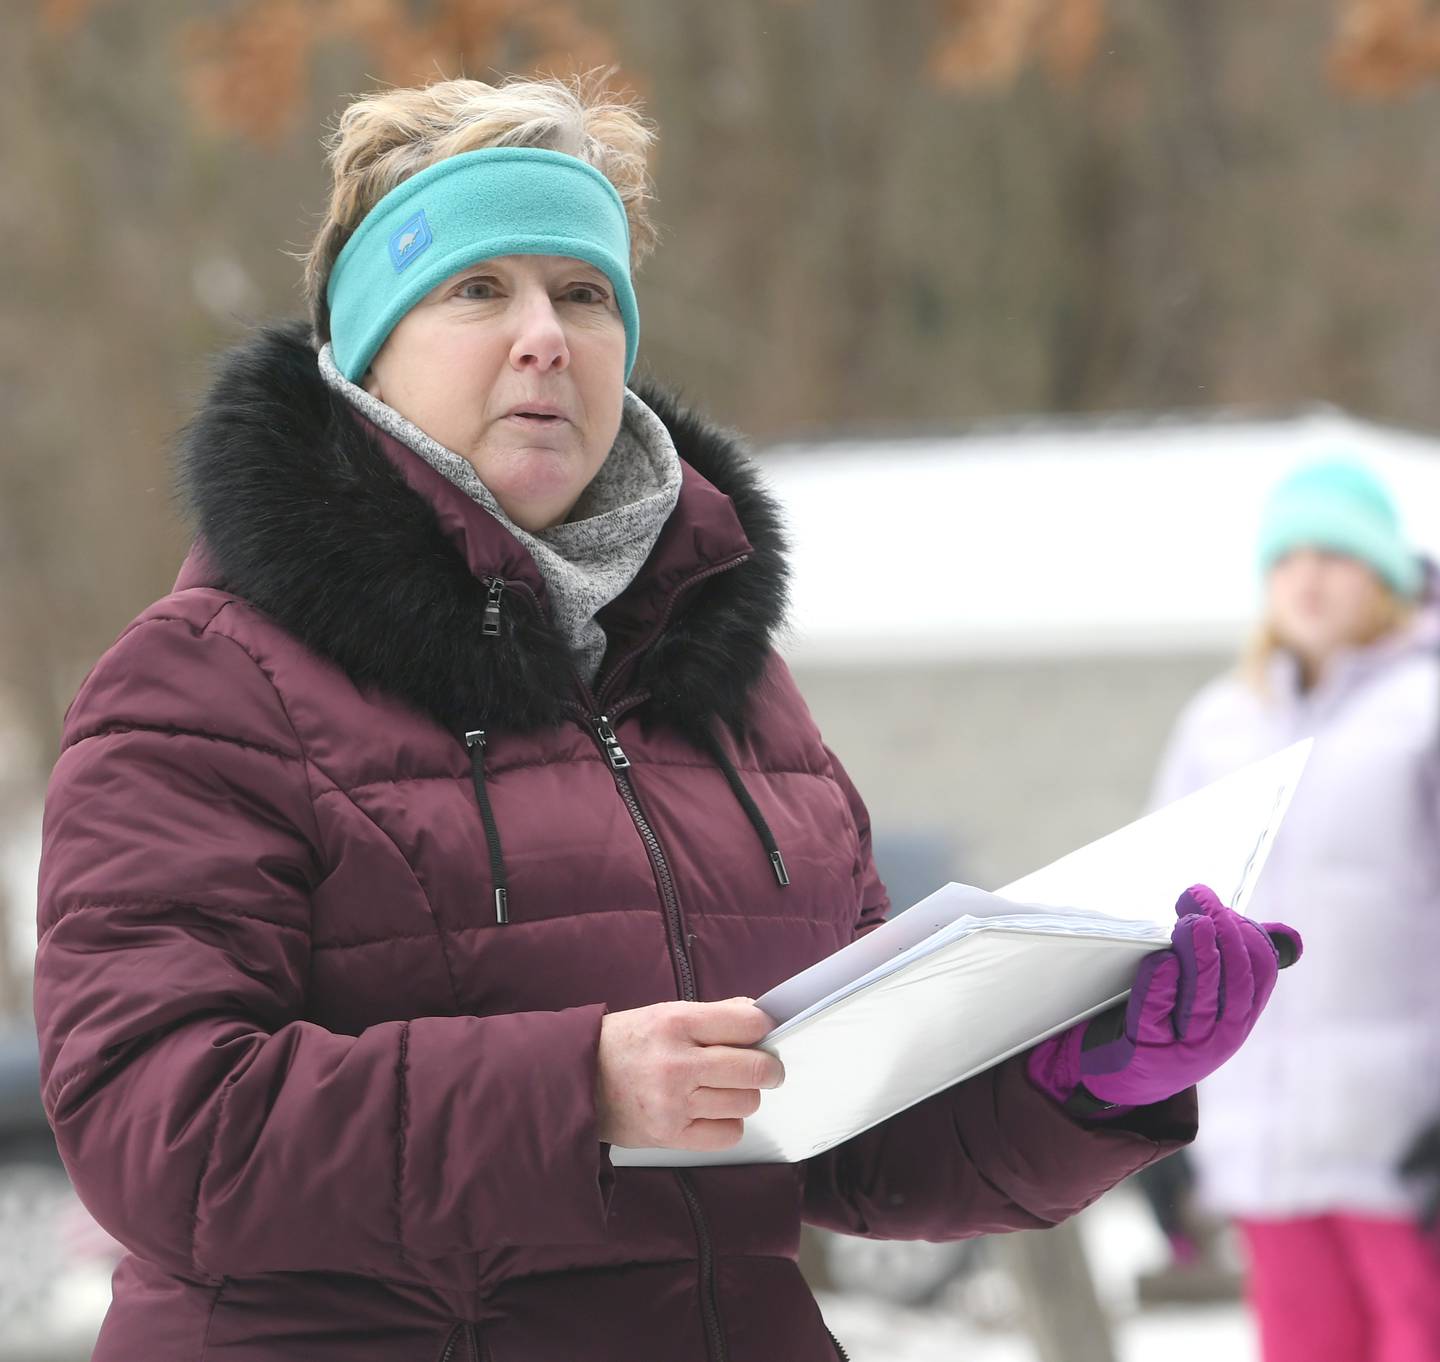 Laurie Perry of the Rochelle chapter of the Daughters of the American Revolution, addresses the crowd at Daysville Cemetery on Dec. 17 during the Wreaths Across America project.